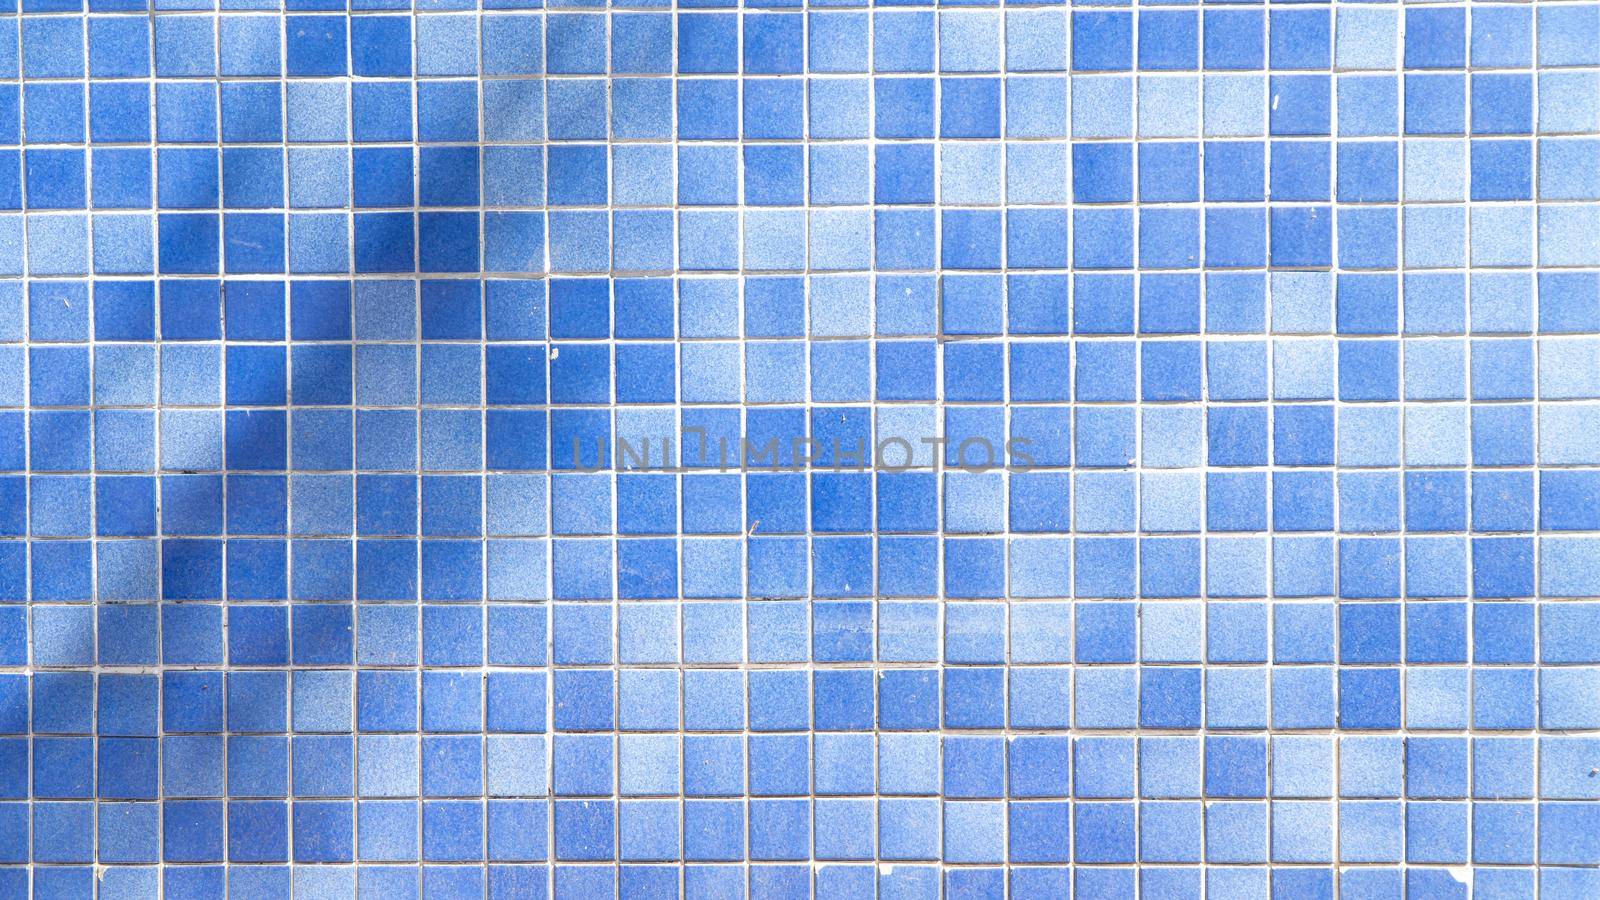 Blue tiles squared, mosaic background by voktybre